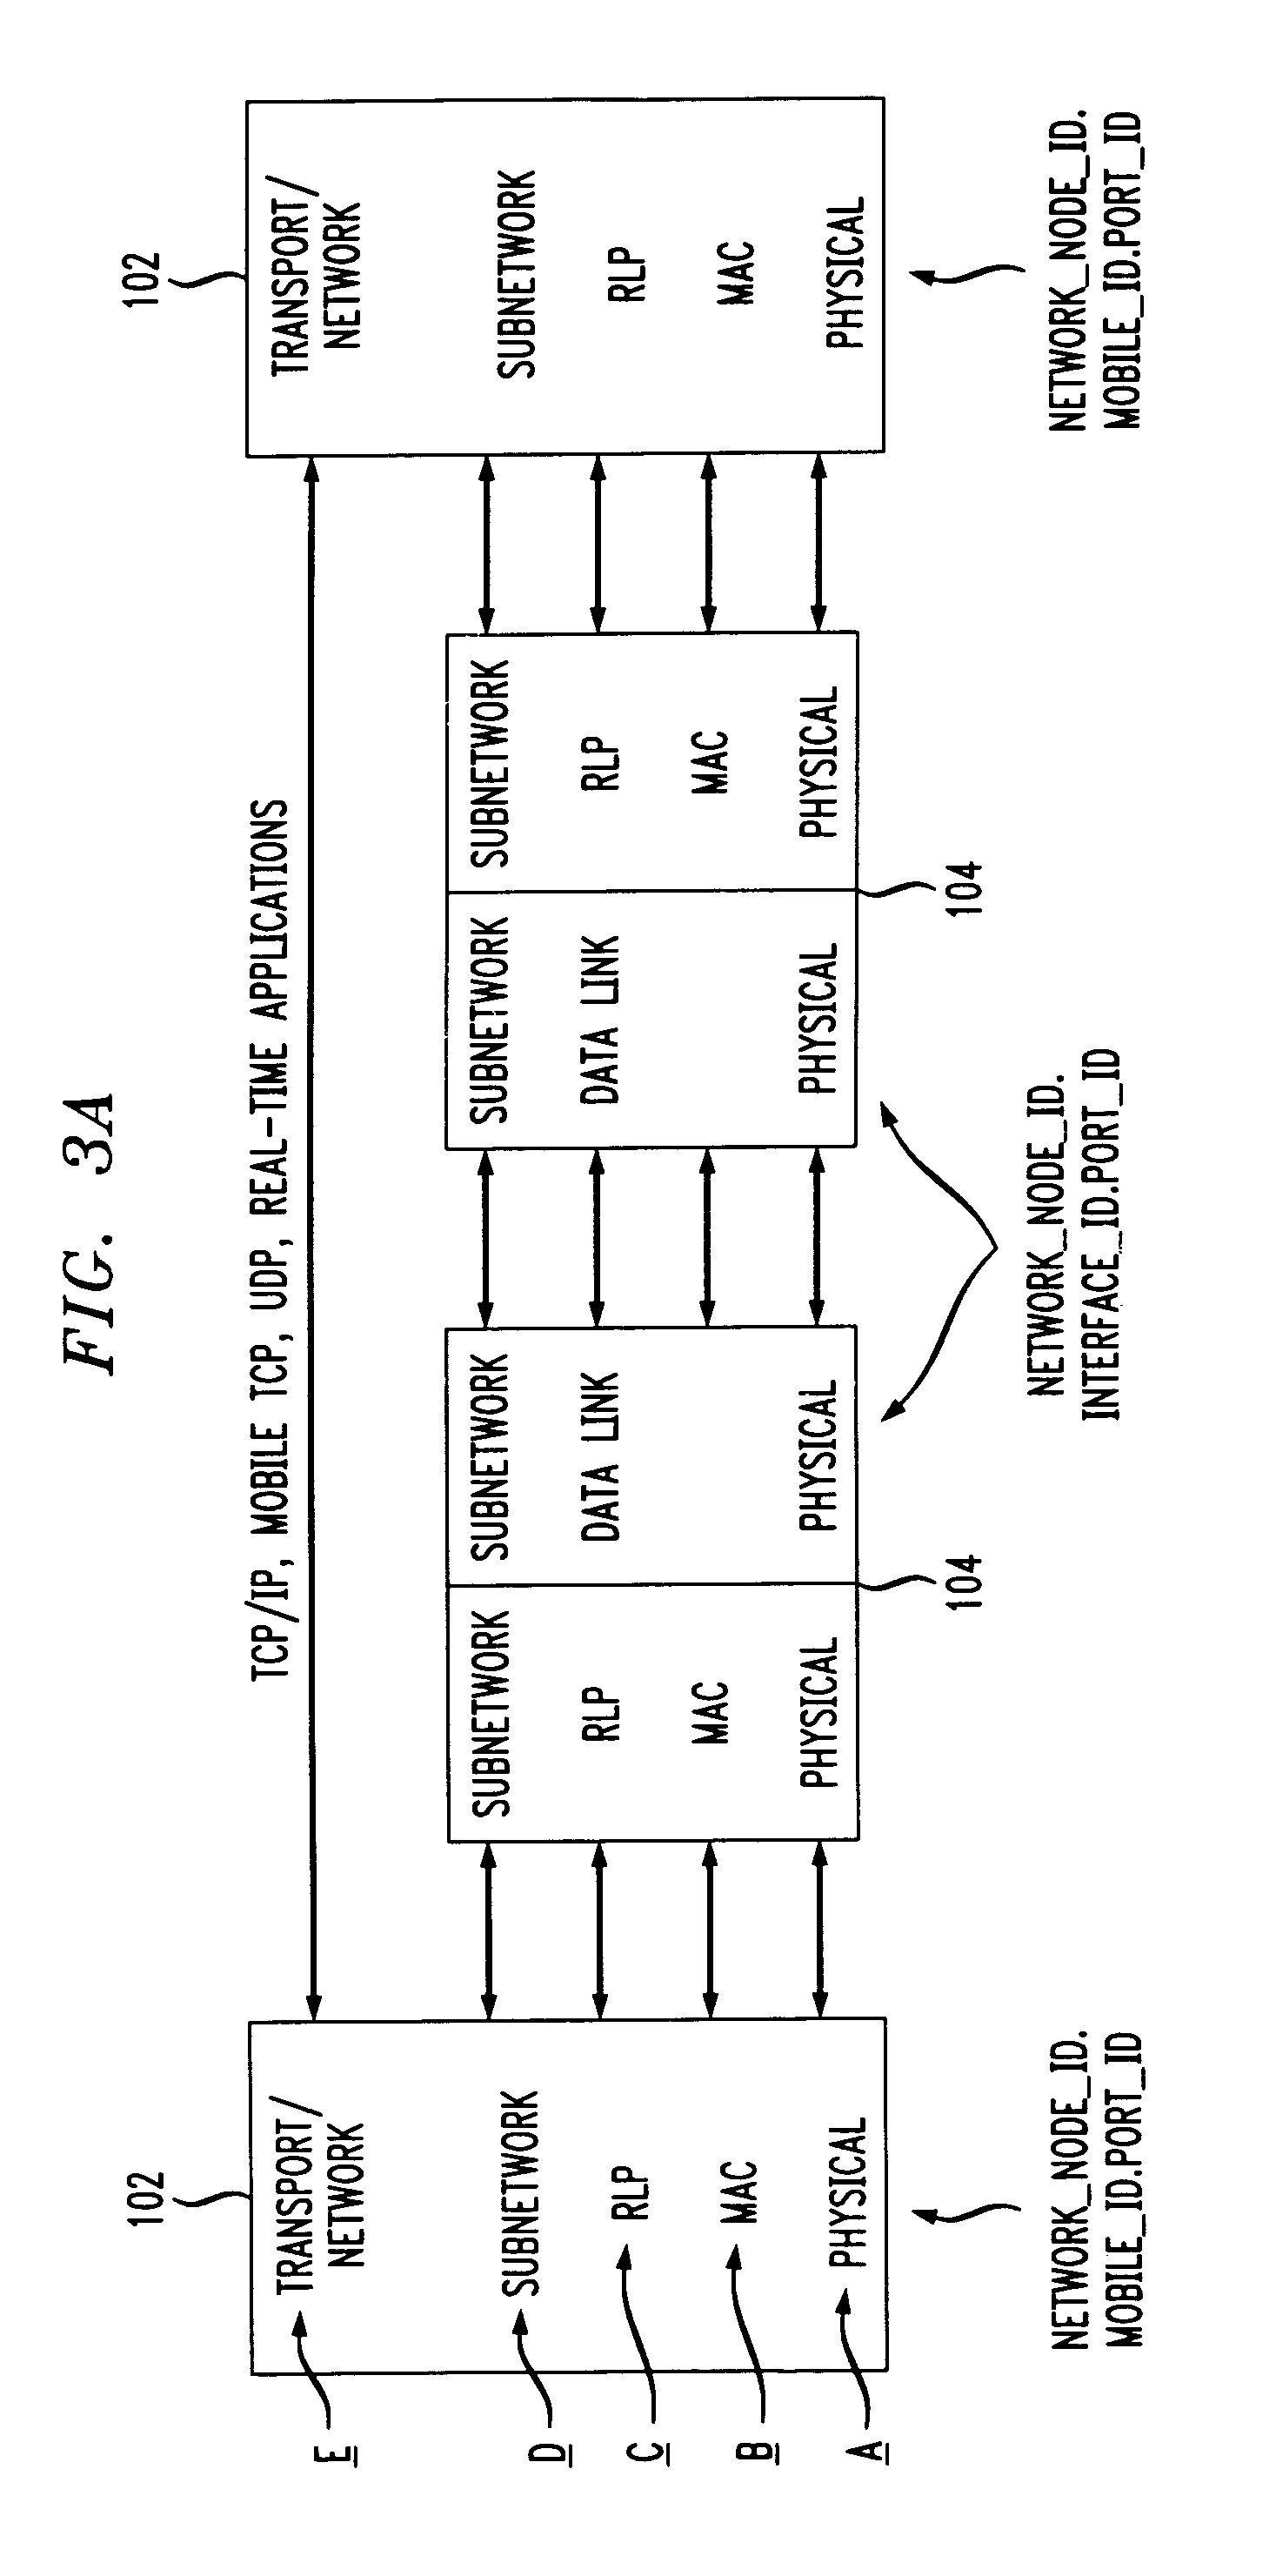 Addressing scheme for a multimedia mobile network